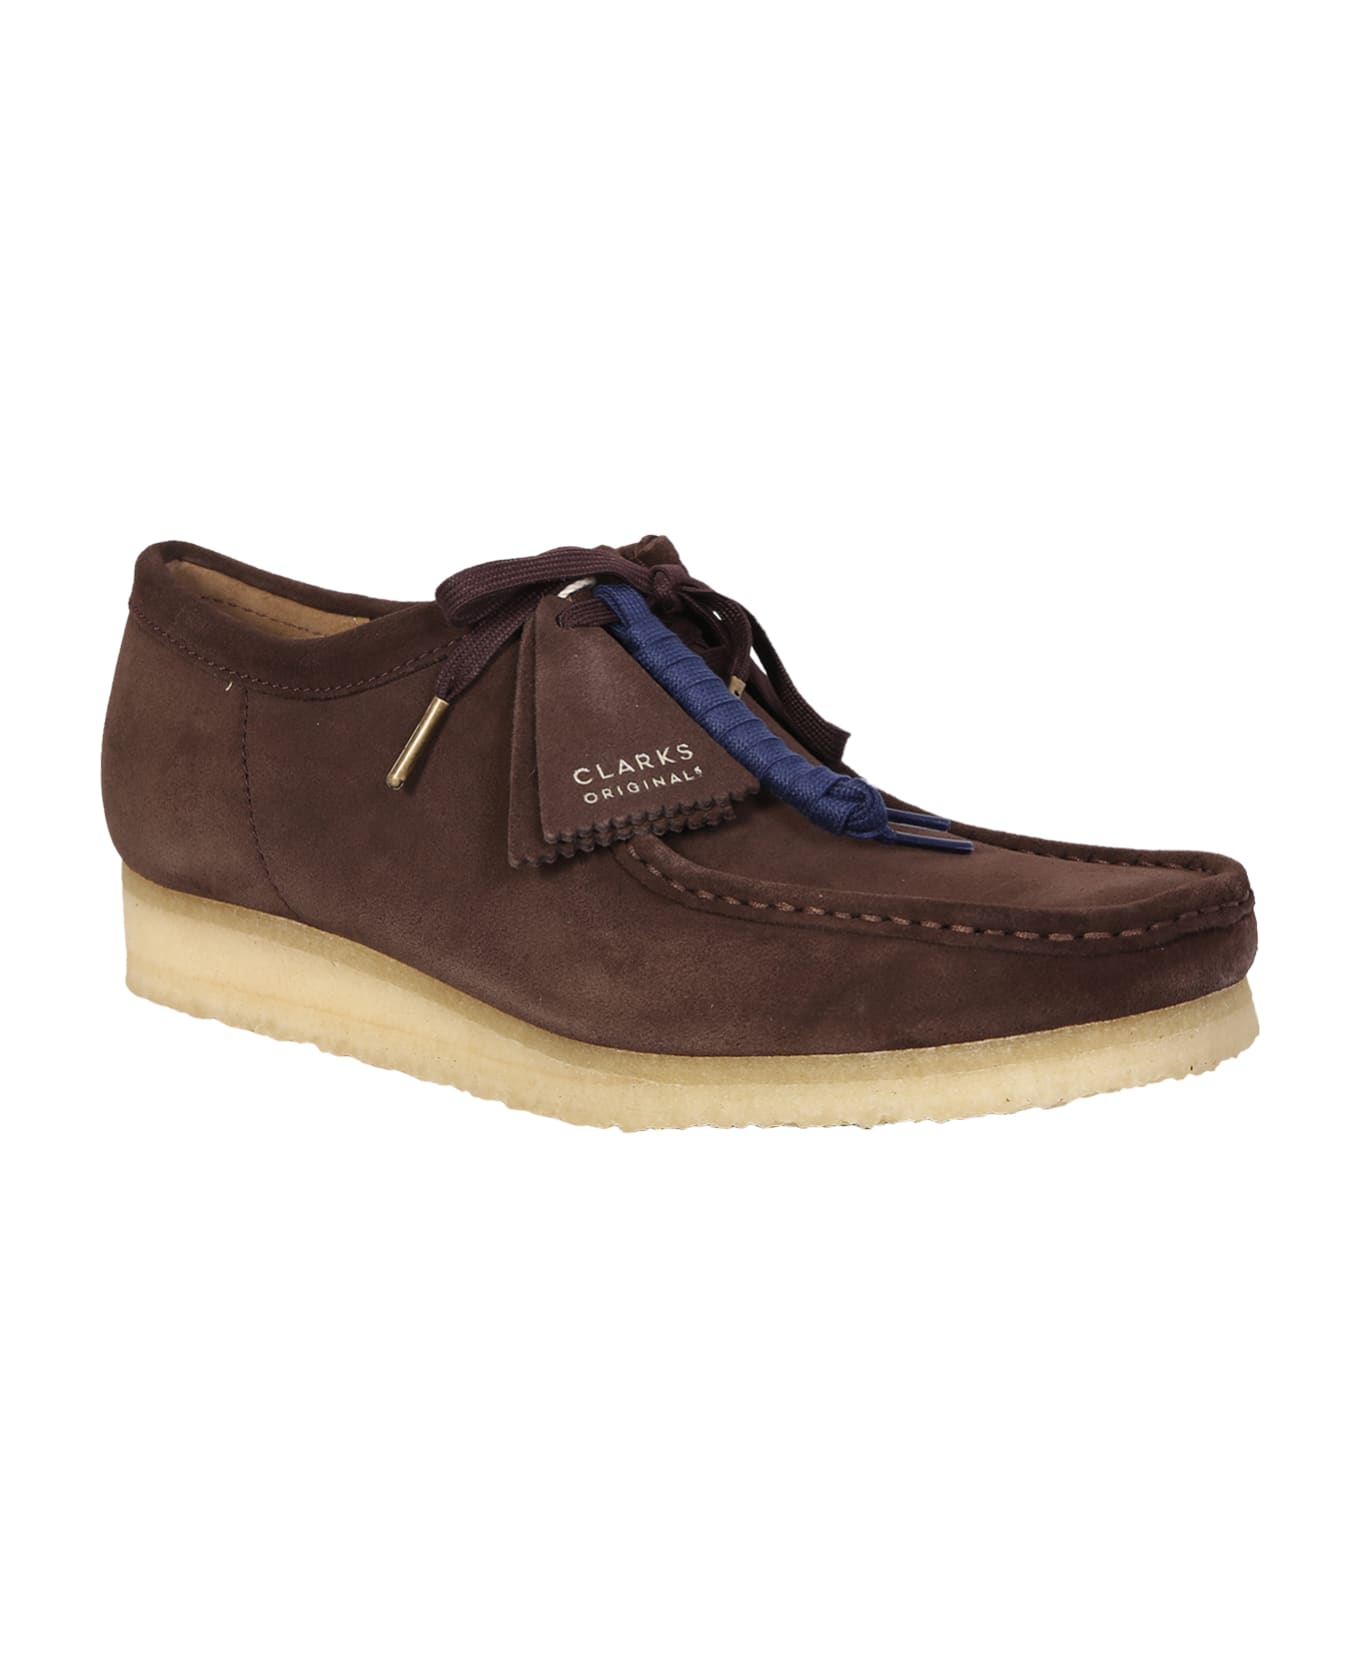 Clarks Wallabee Shoes - Brown ローファー＆デッキシューズ